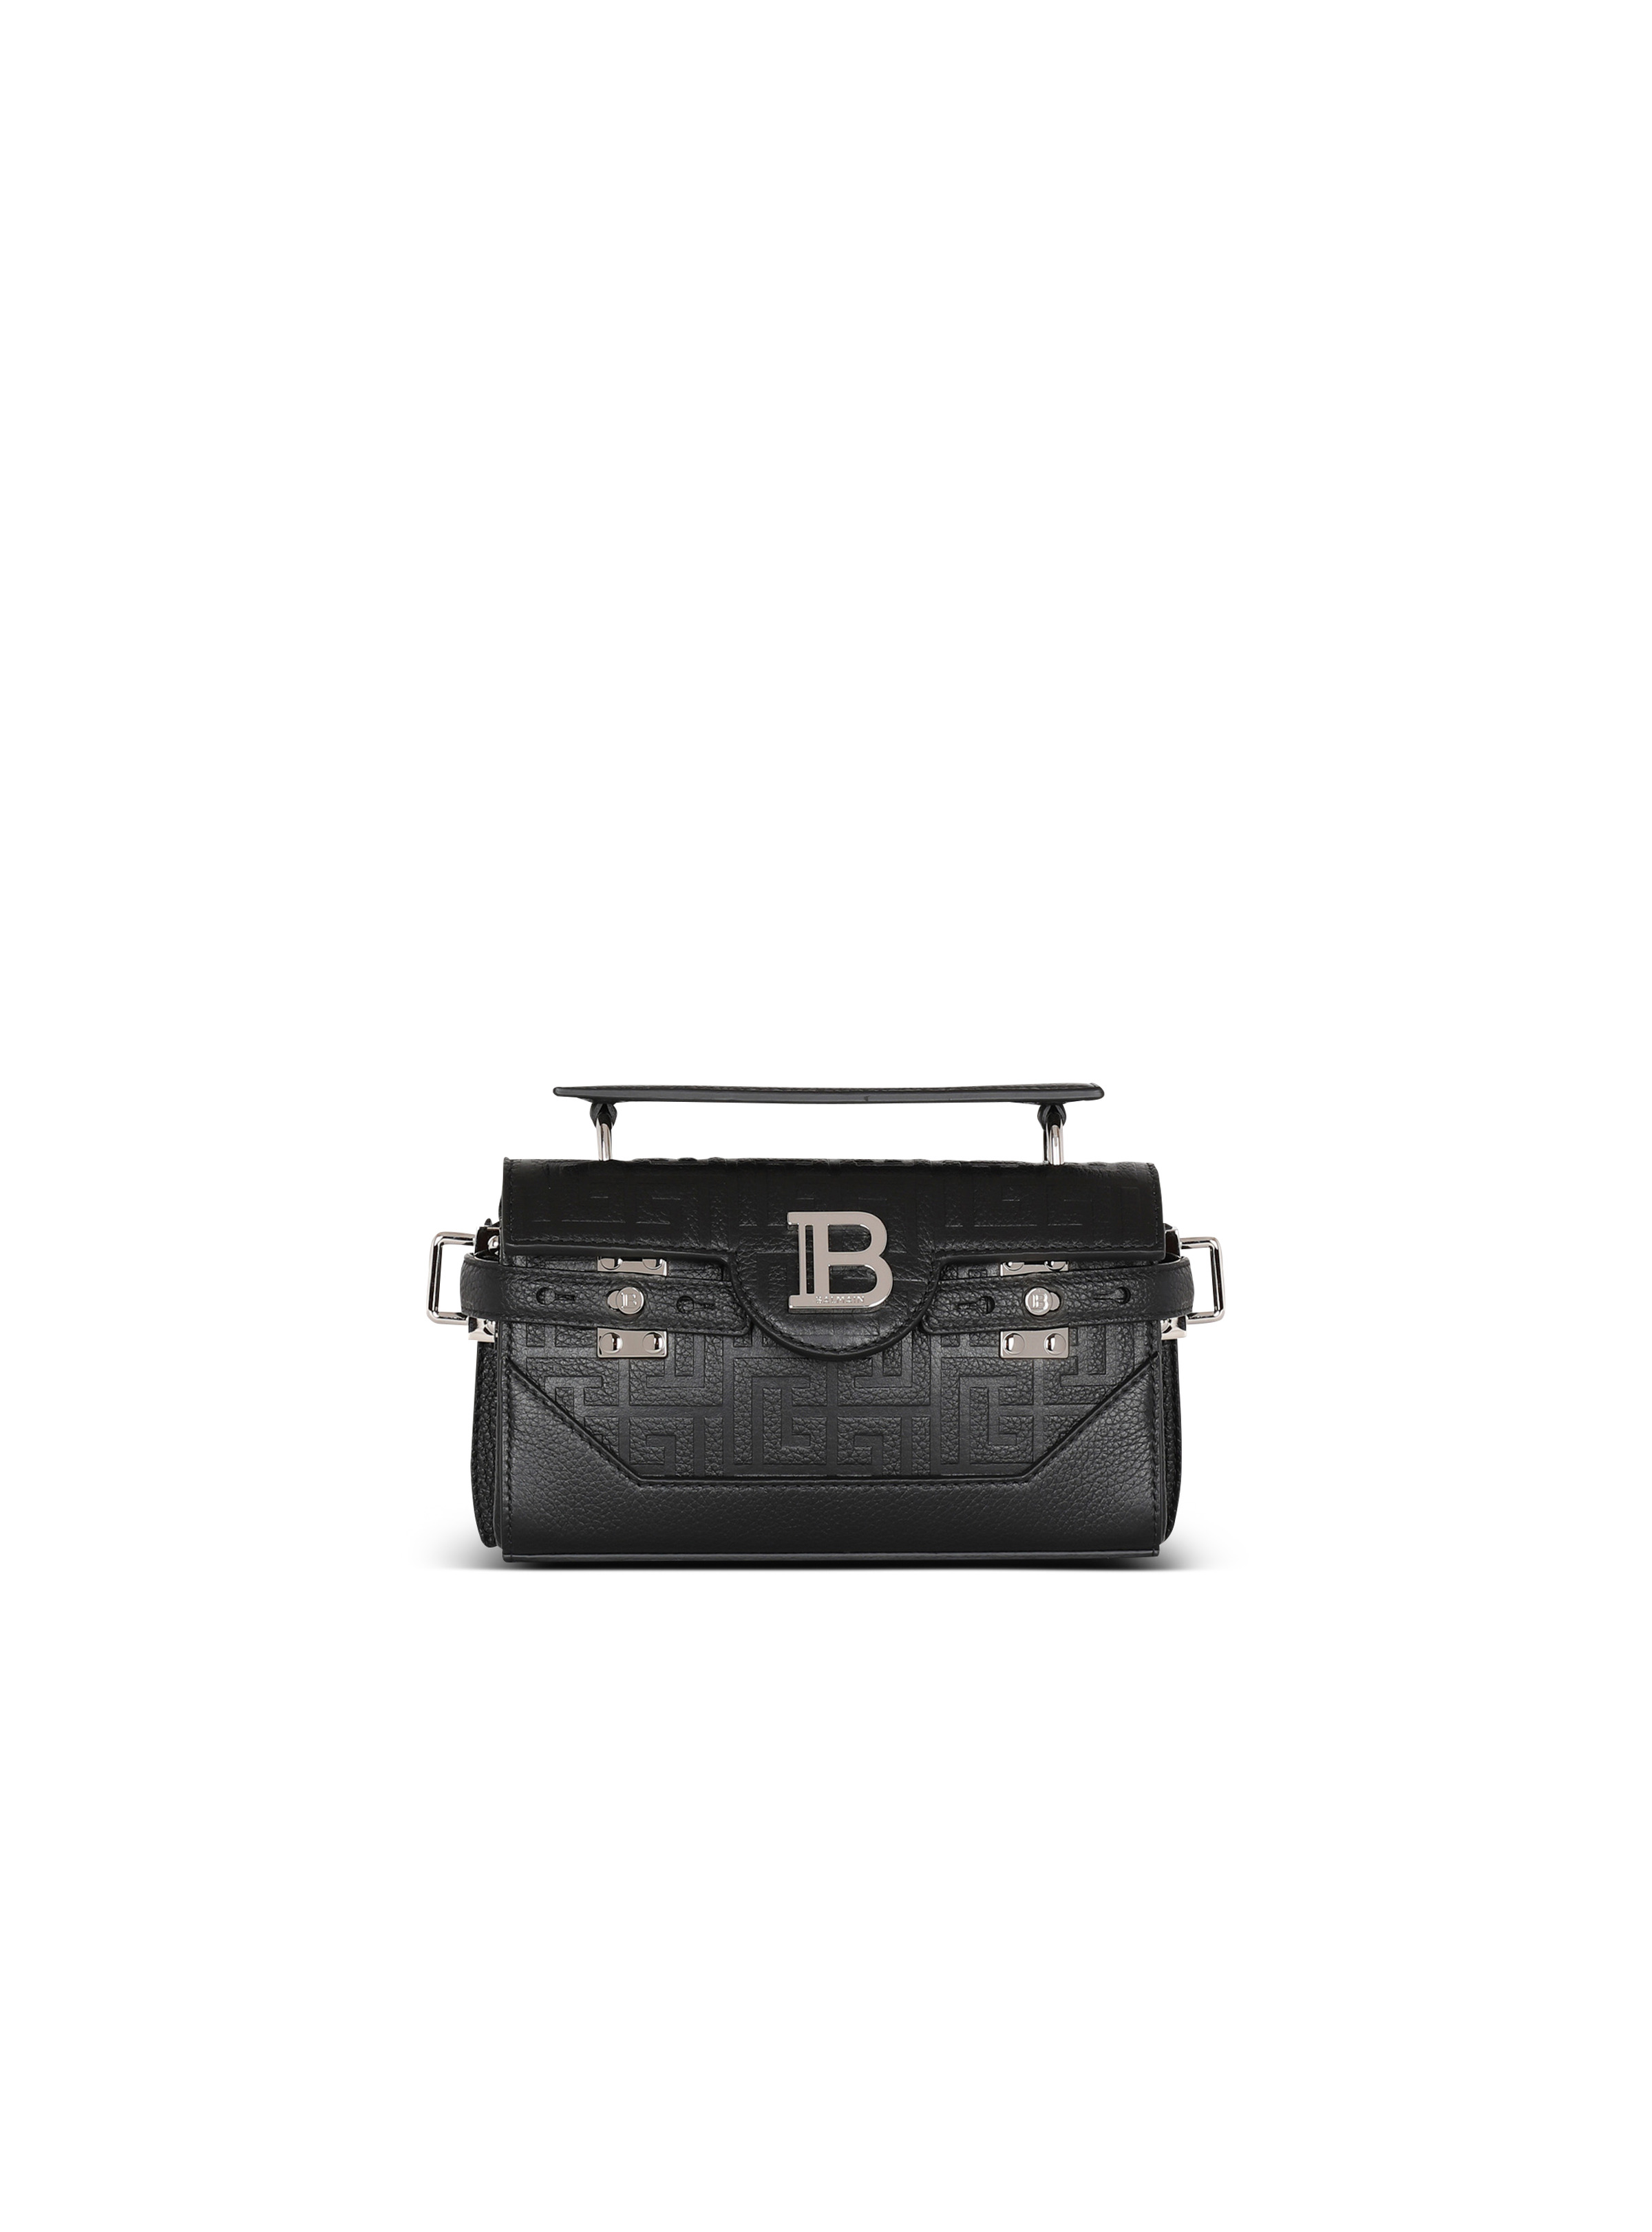 B-Buzz 19 monogrammed canvas and leather bag - 1